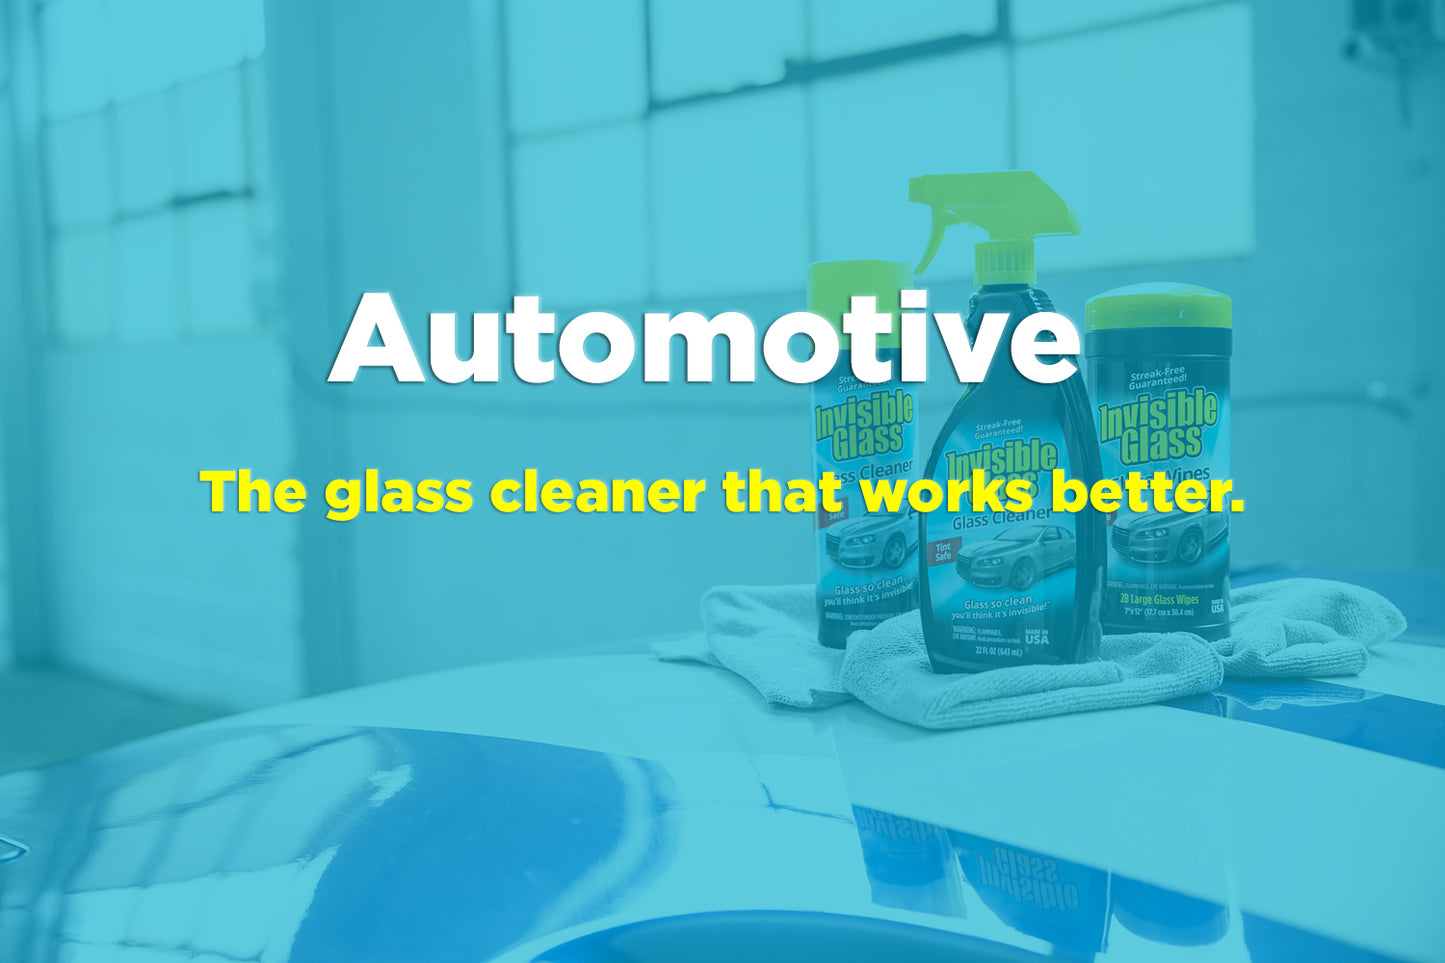 Stoner Car Care Official on Instagram: Stoner Invisible Glass is the #1  automotive glass cleaner. Invisible Glass is streak-free and tint safe!  Stop by your local AutoZone and pick some up today!